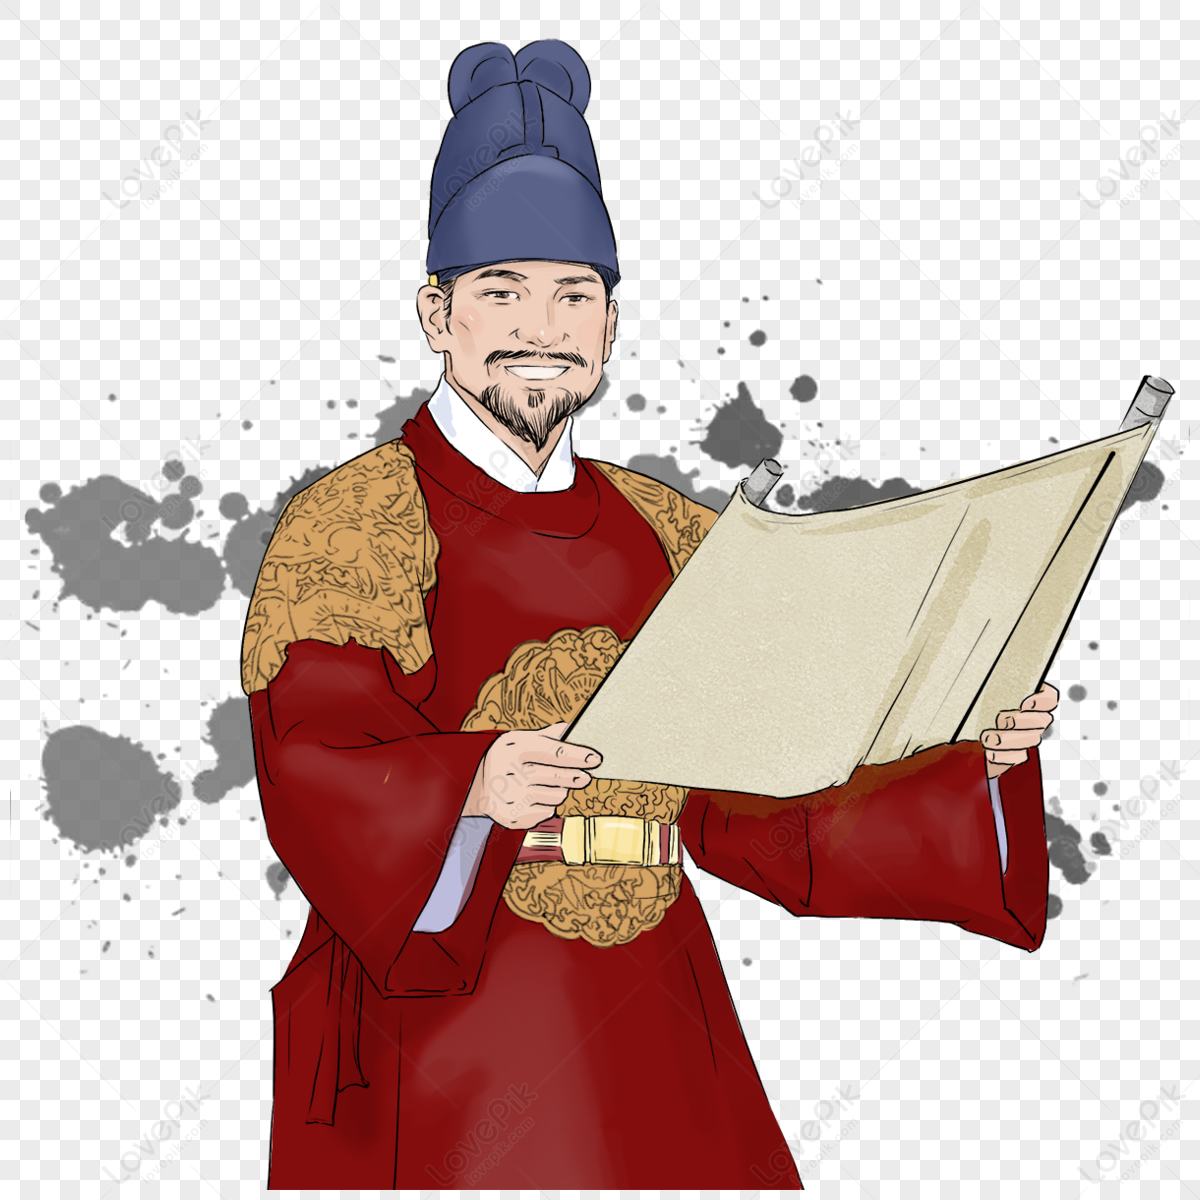 Hand drawn elements of the dossier of Sejong s ancient court in South Korea png transparent image